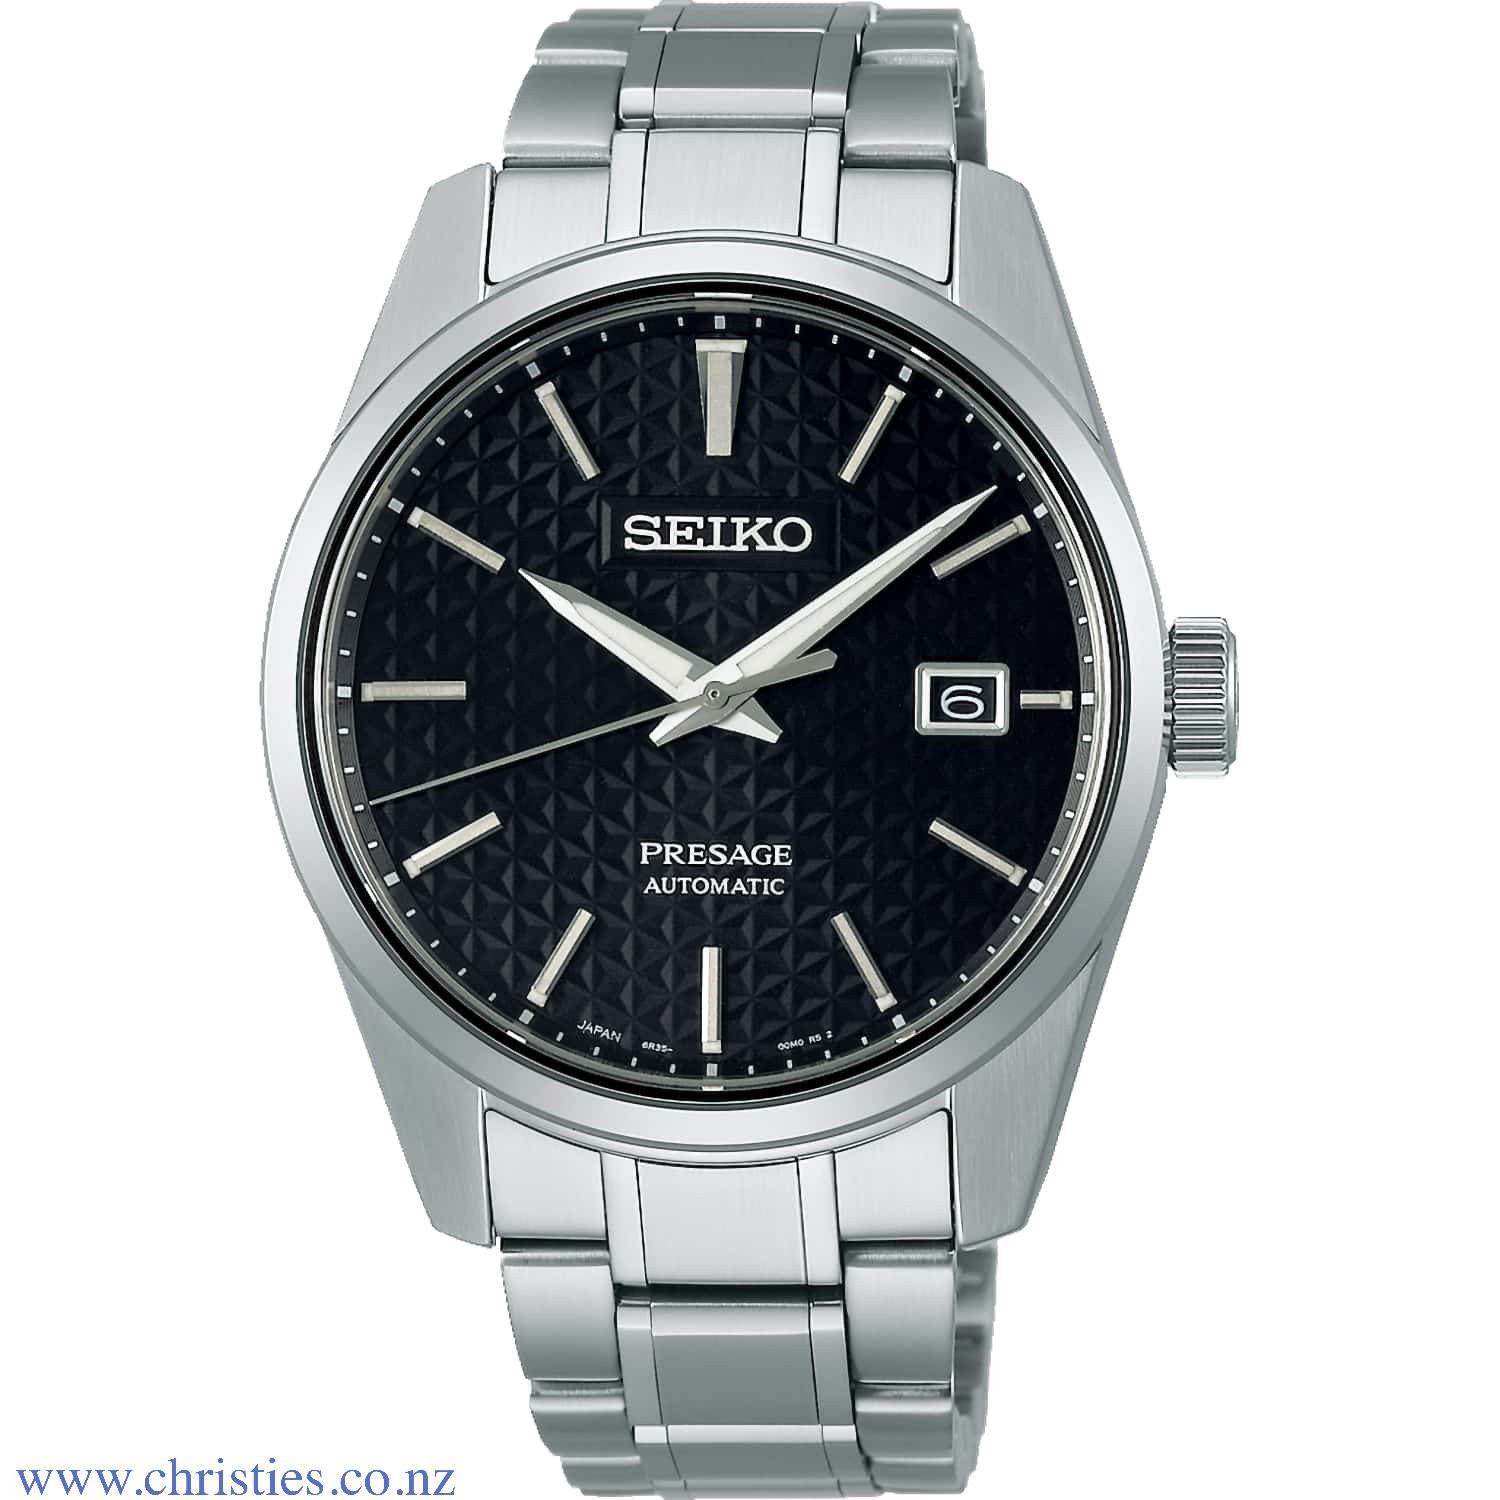 SPB203J Seiko Presage Automatic Watch. SPB203J Seiko Presage Automatic Watch  Afterpay - Split your purchase into 4 instalments - Pay for your purchase over 4 instalments, due every two weeks. You’ll pay your first installment at the time of p garmin fore